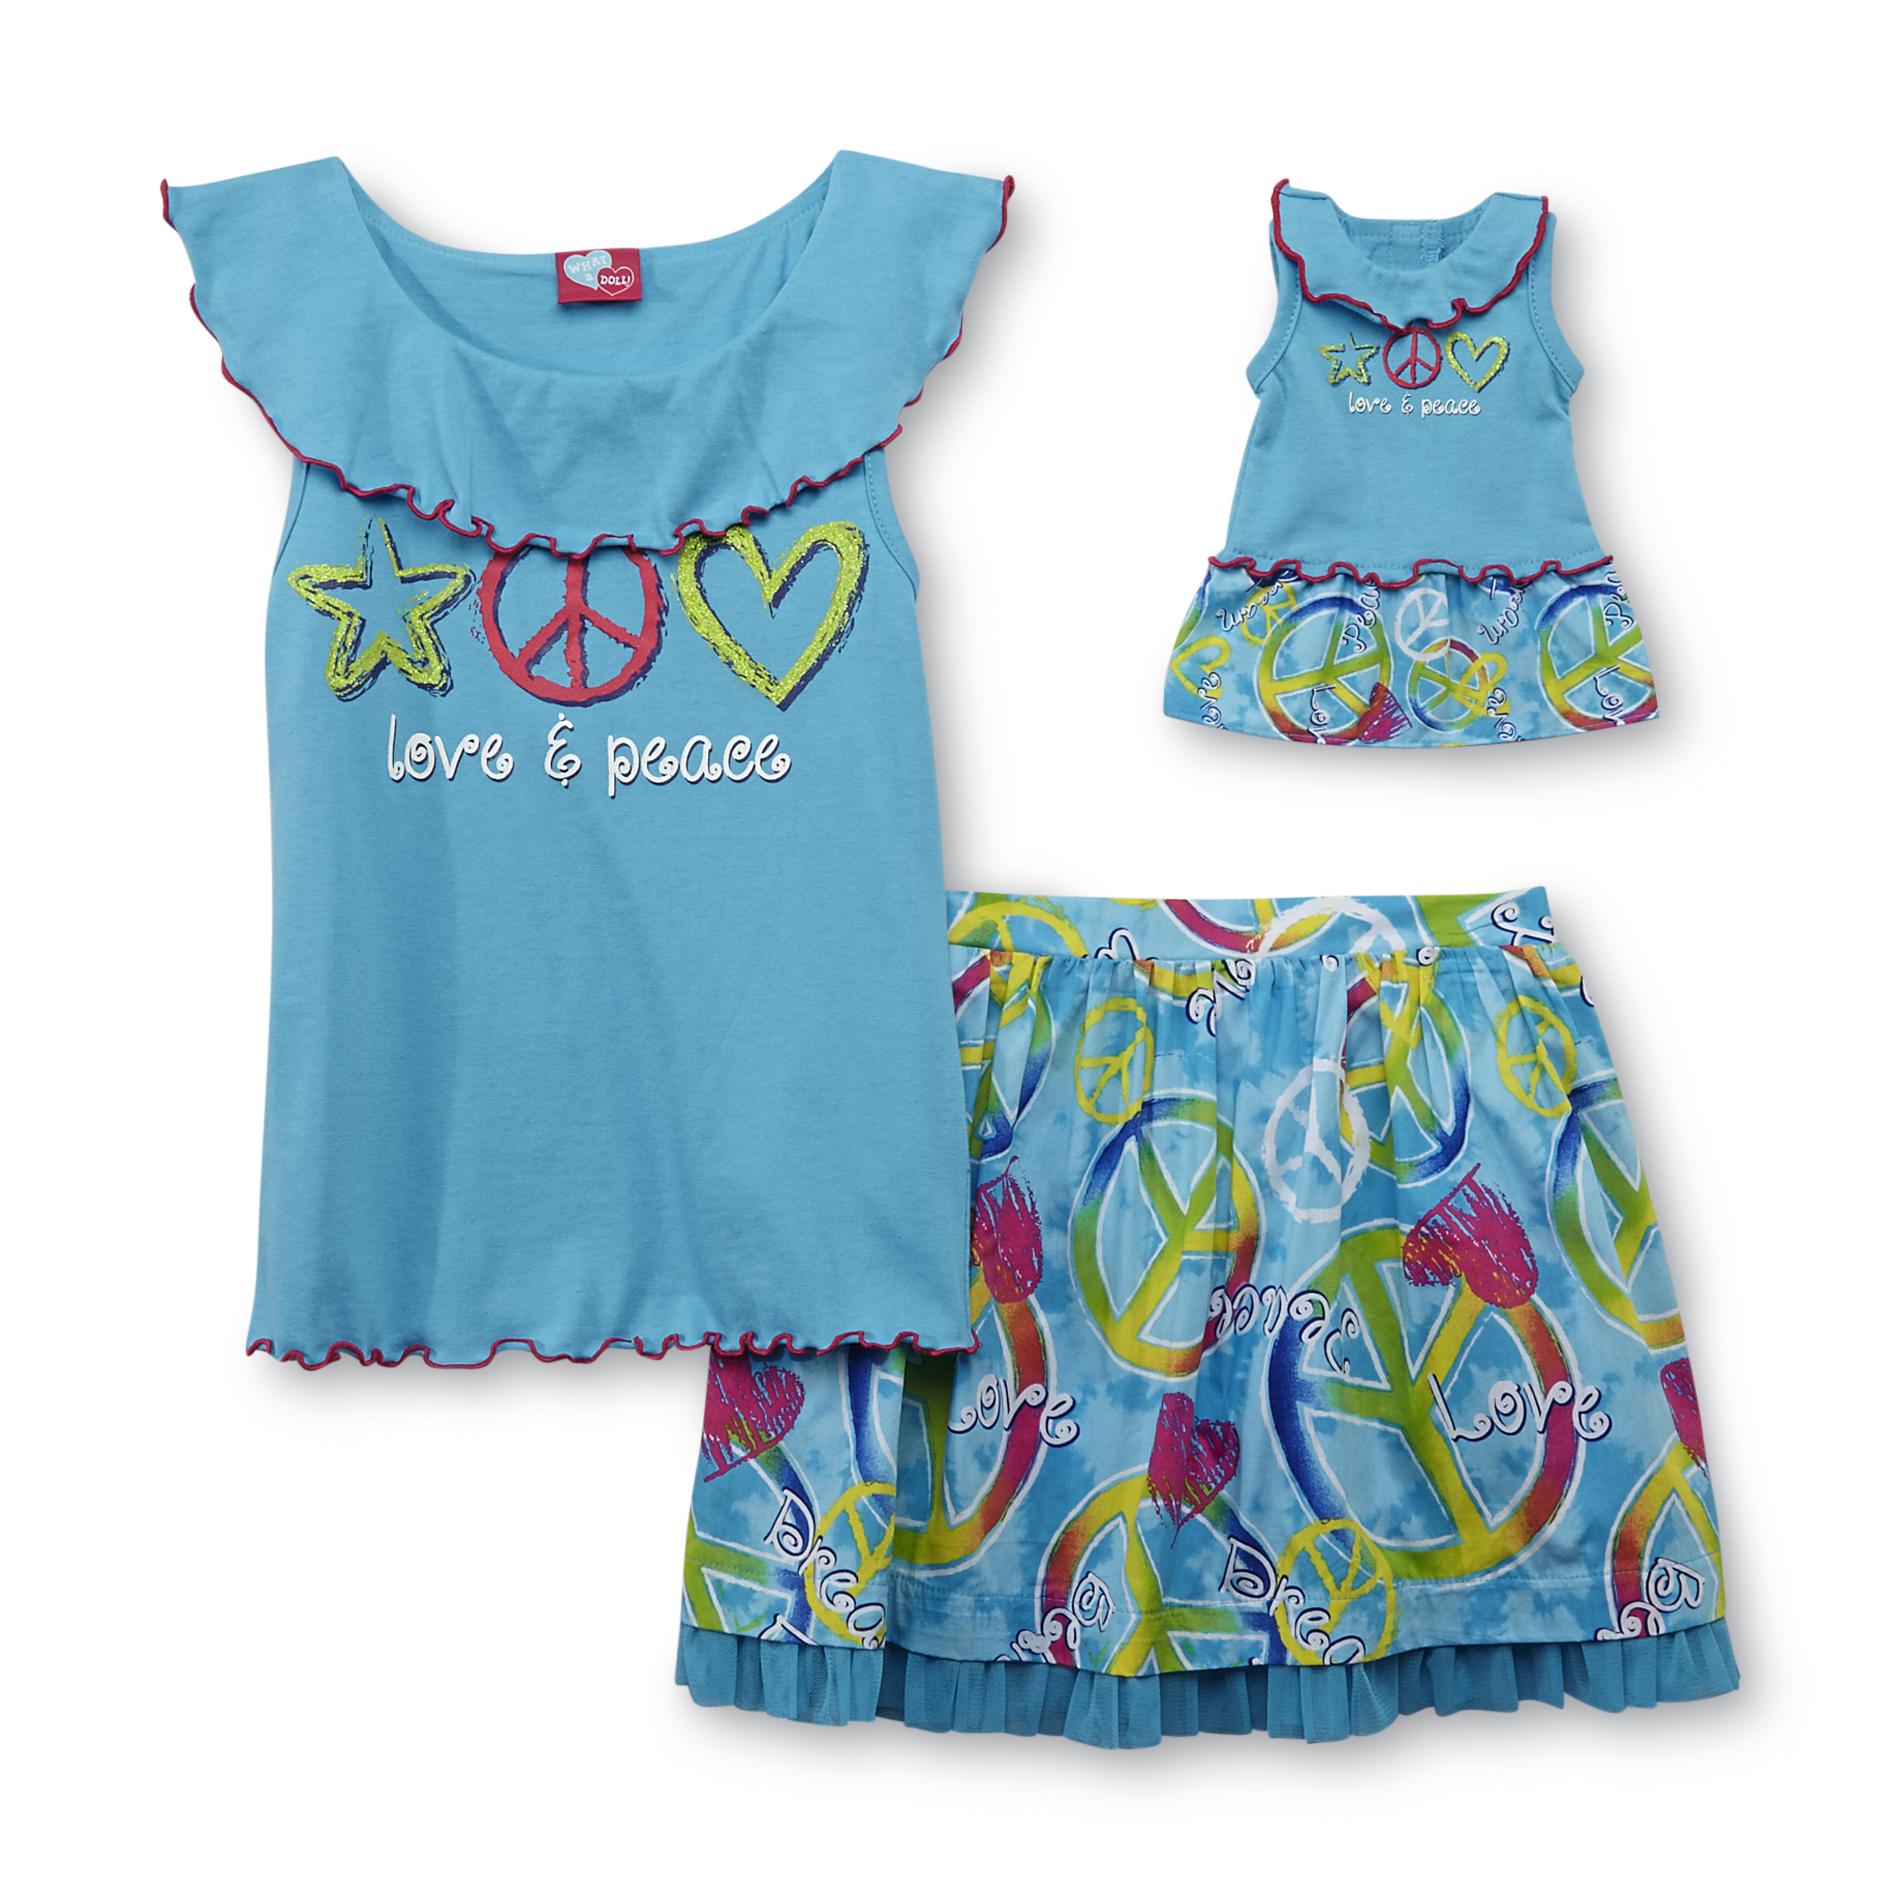 What A Doll Girl's Graphic T-shirt  Skirt & Doll Outfit